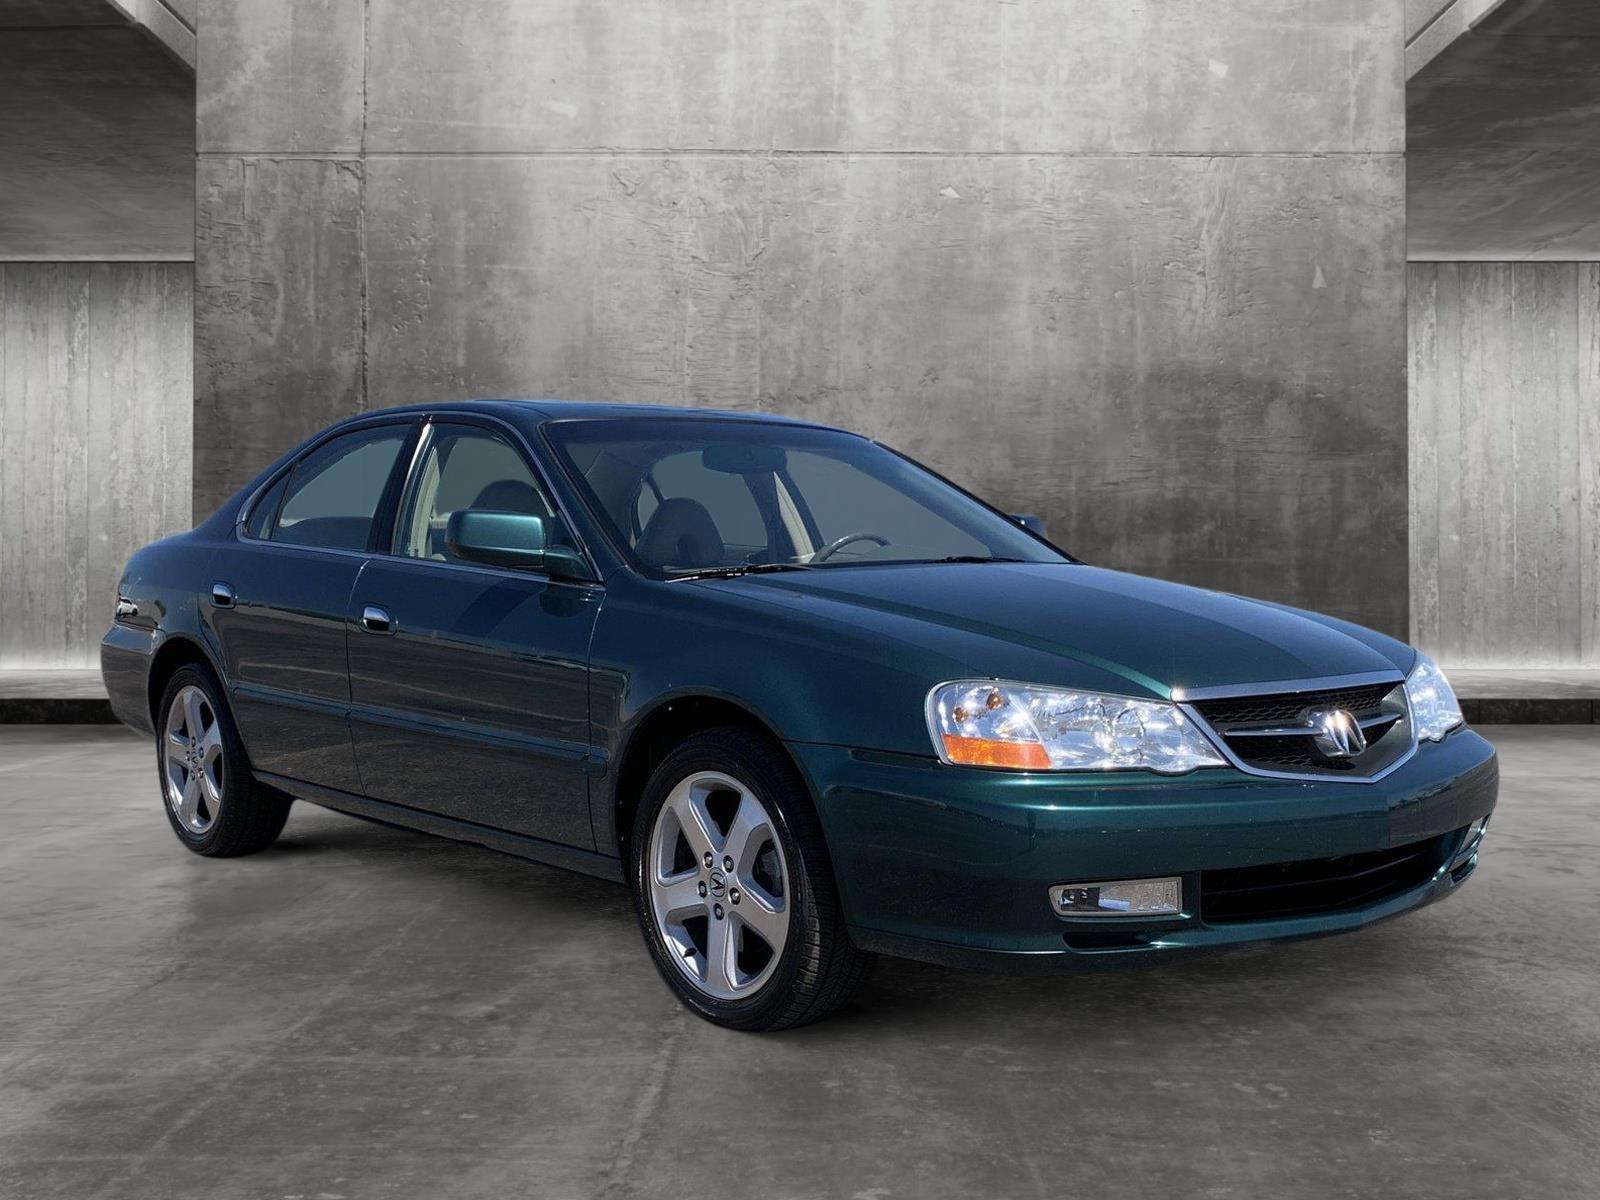 Used 2003 Acura TL Type-S with VIN 19UUA56883A014480 for sale in Ft Lauderdale, FL